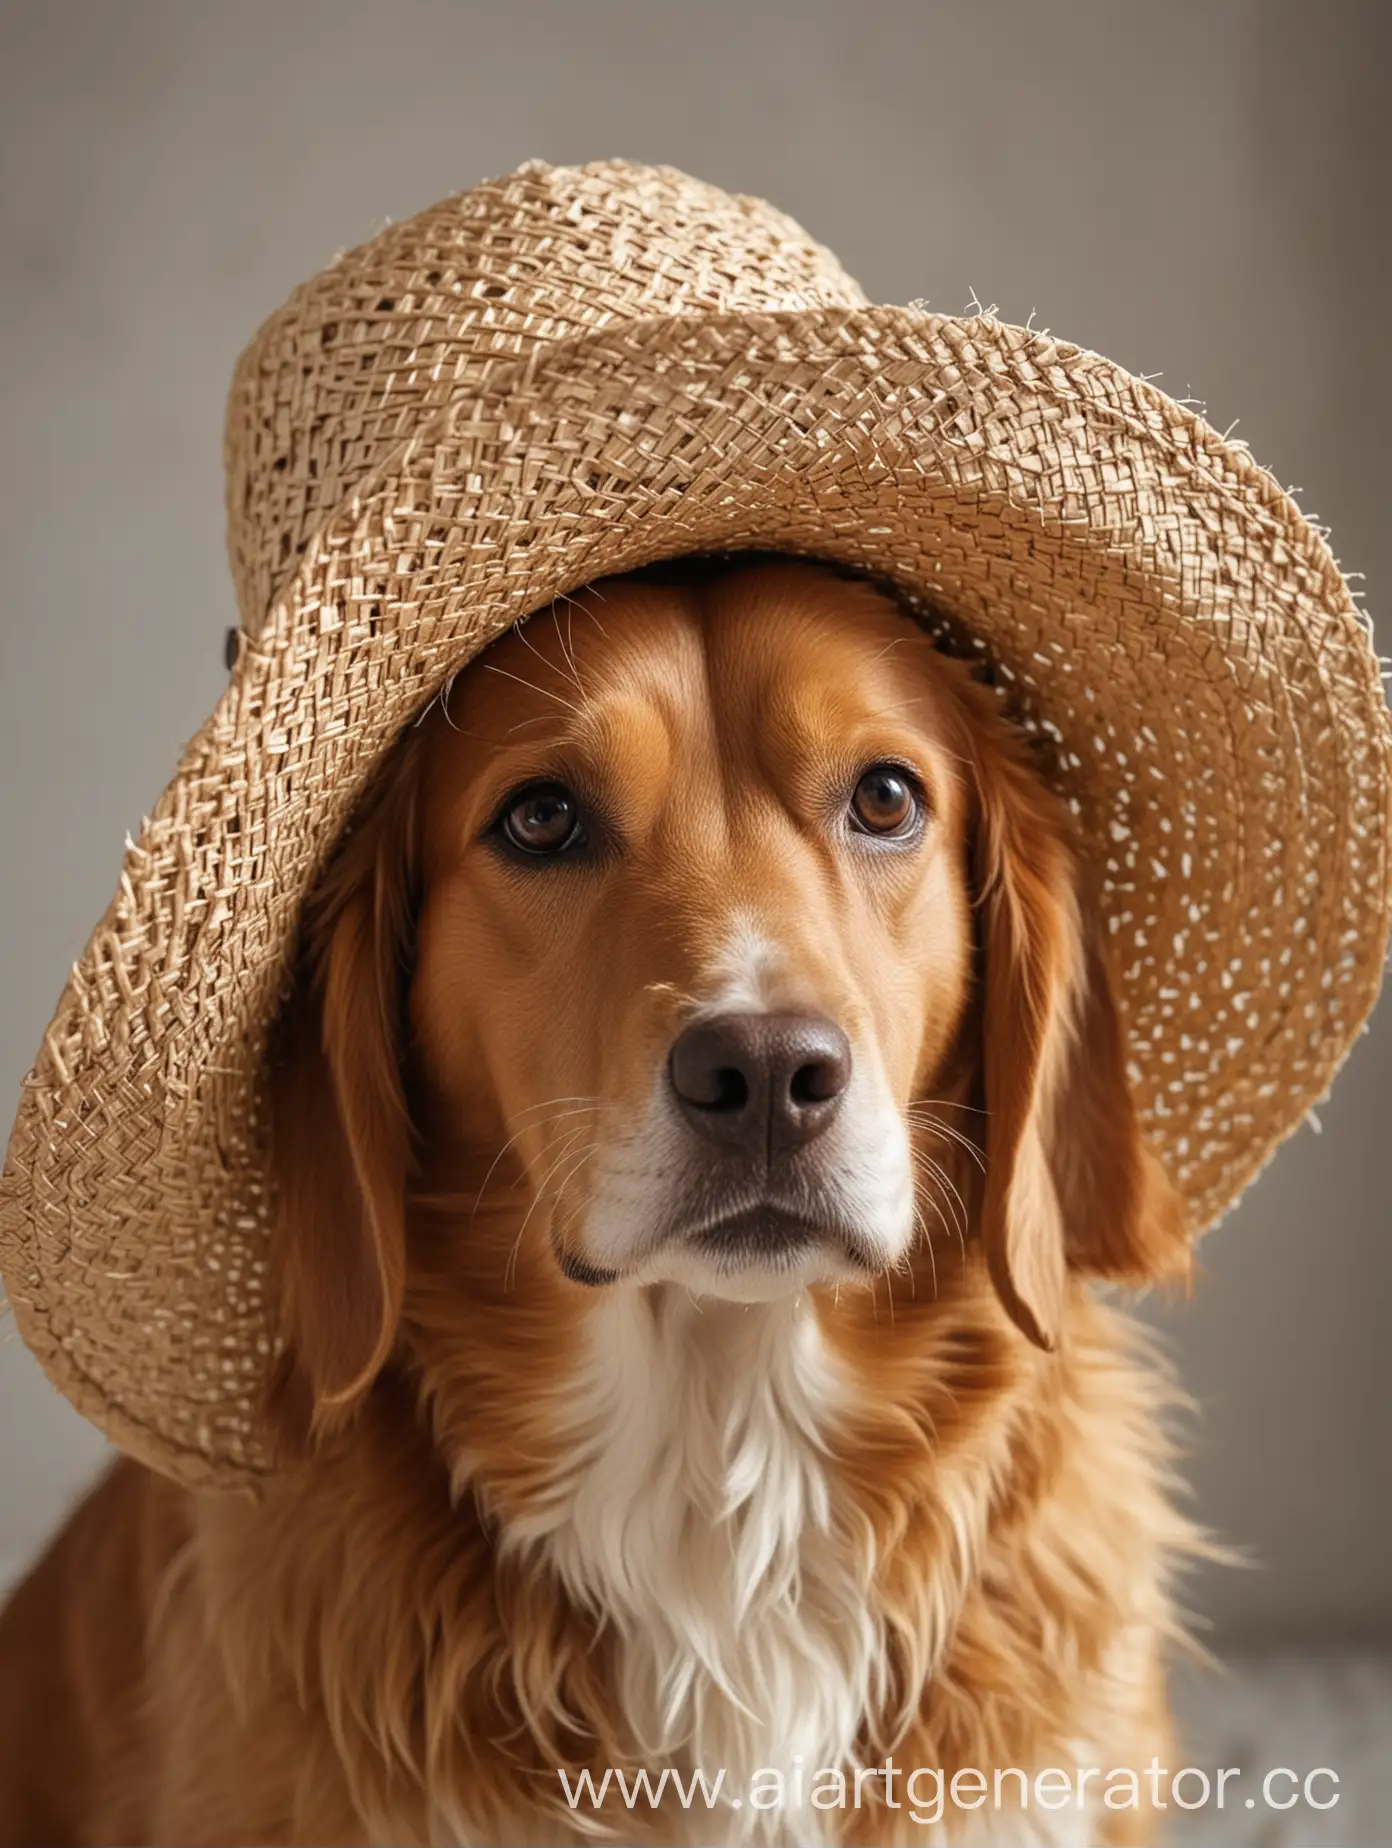 Dog-Wearing-Straw-Hat-Looking-into-Frame